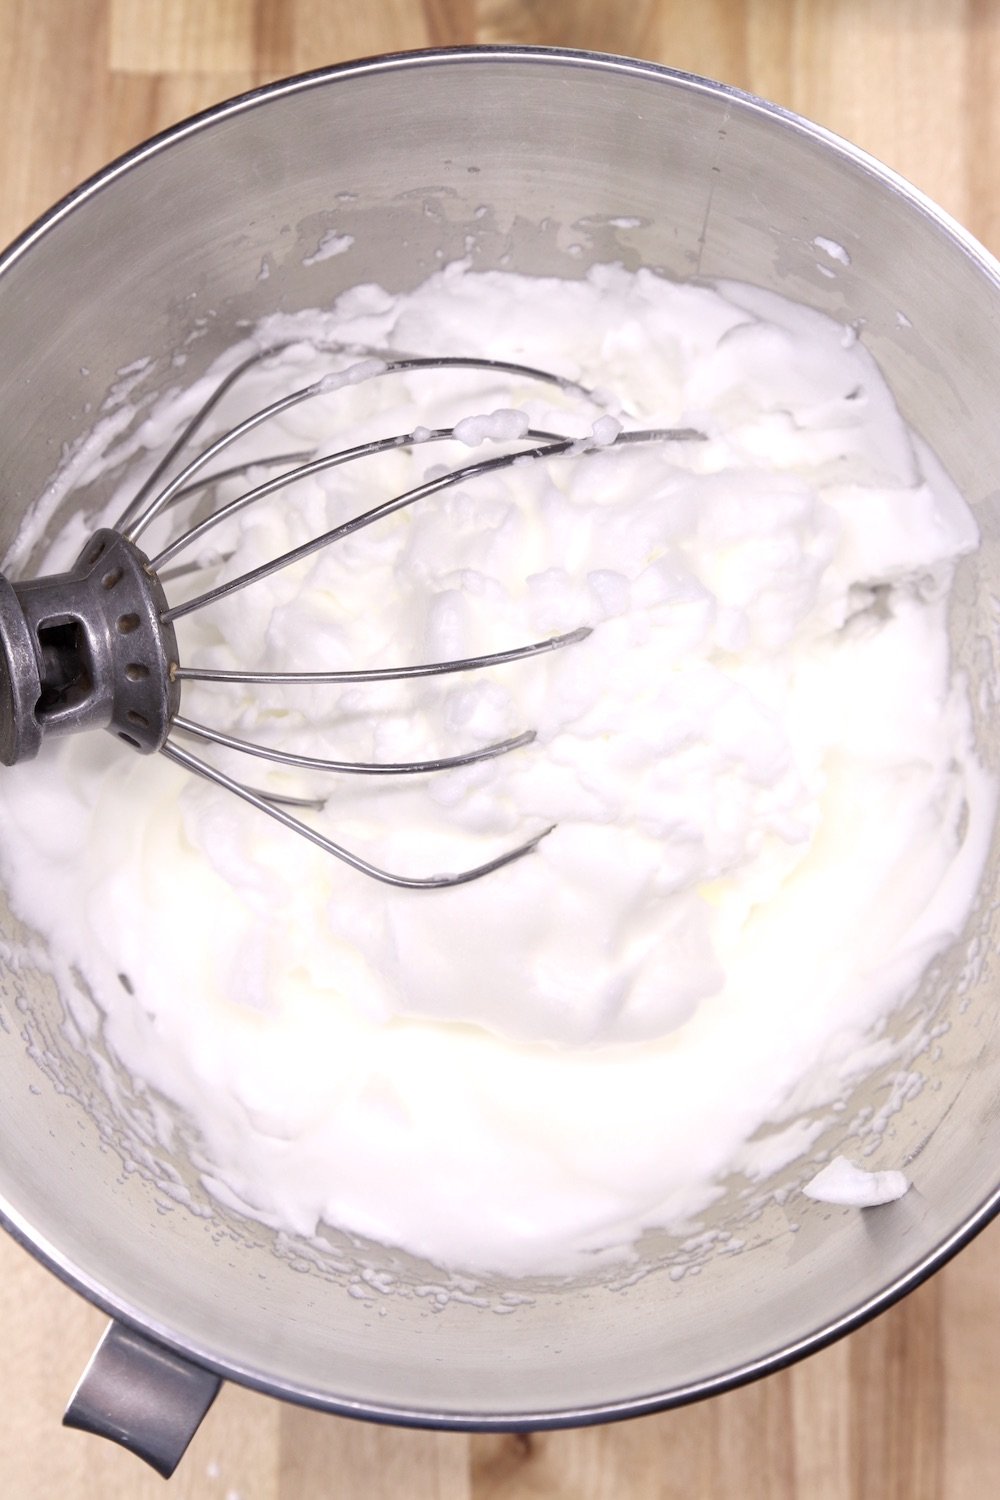 whipped egg whites in a mixer bowl with wire whisk attachment